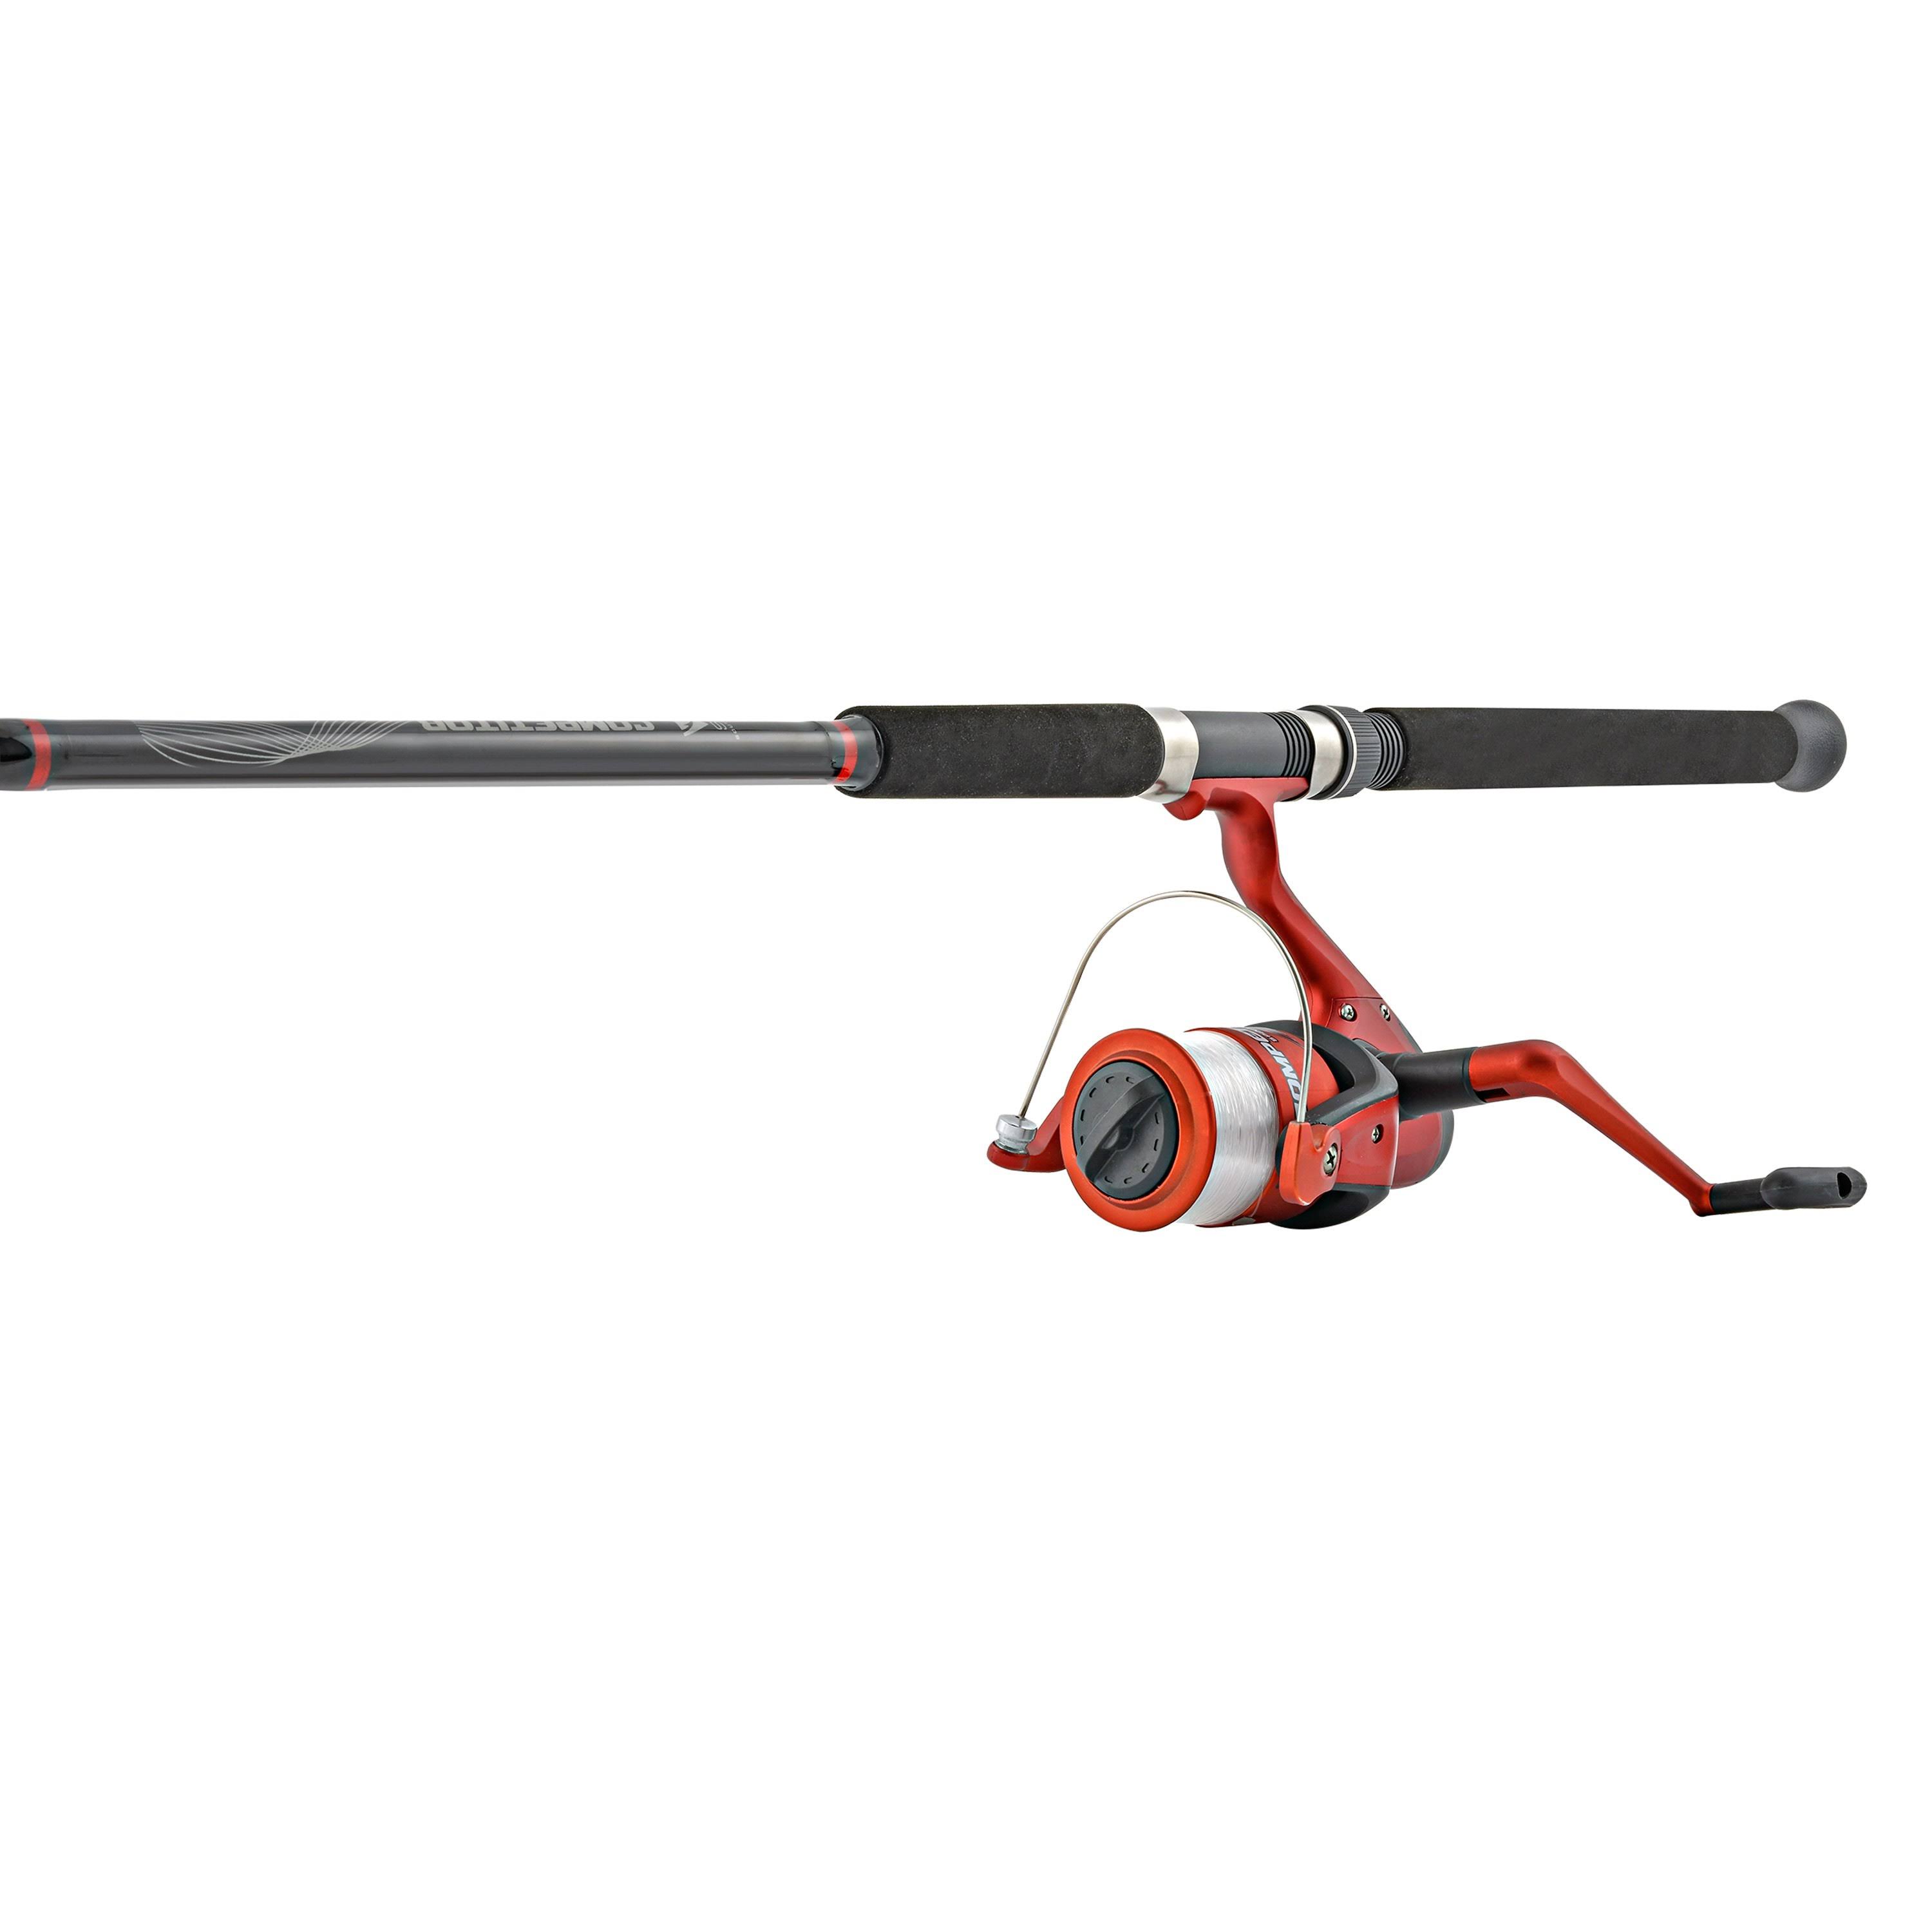 South Bend Competitor Spinning Combo Rod and Reel - 7'